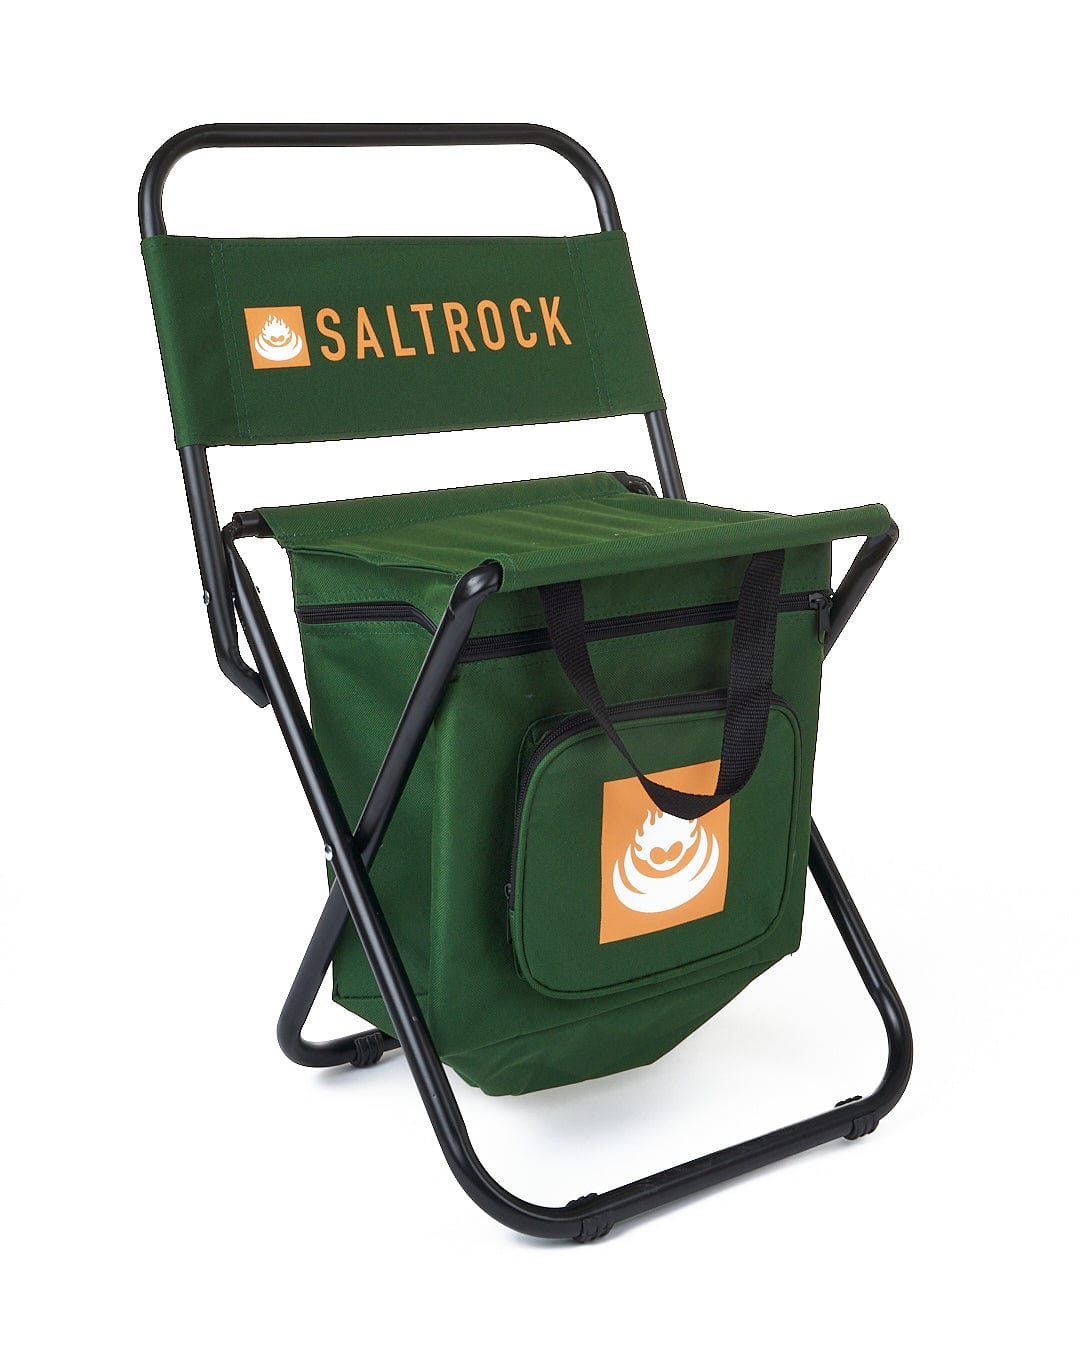 A dark green Spectator - Foldable Chair with Cooler Bag with the brand name Saltrock on it.